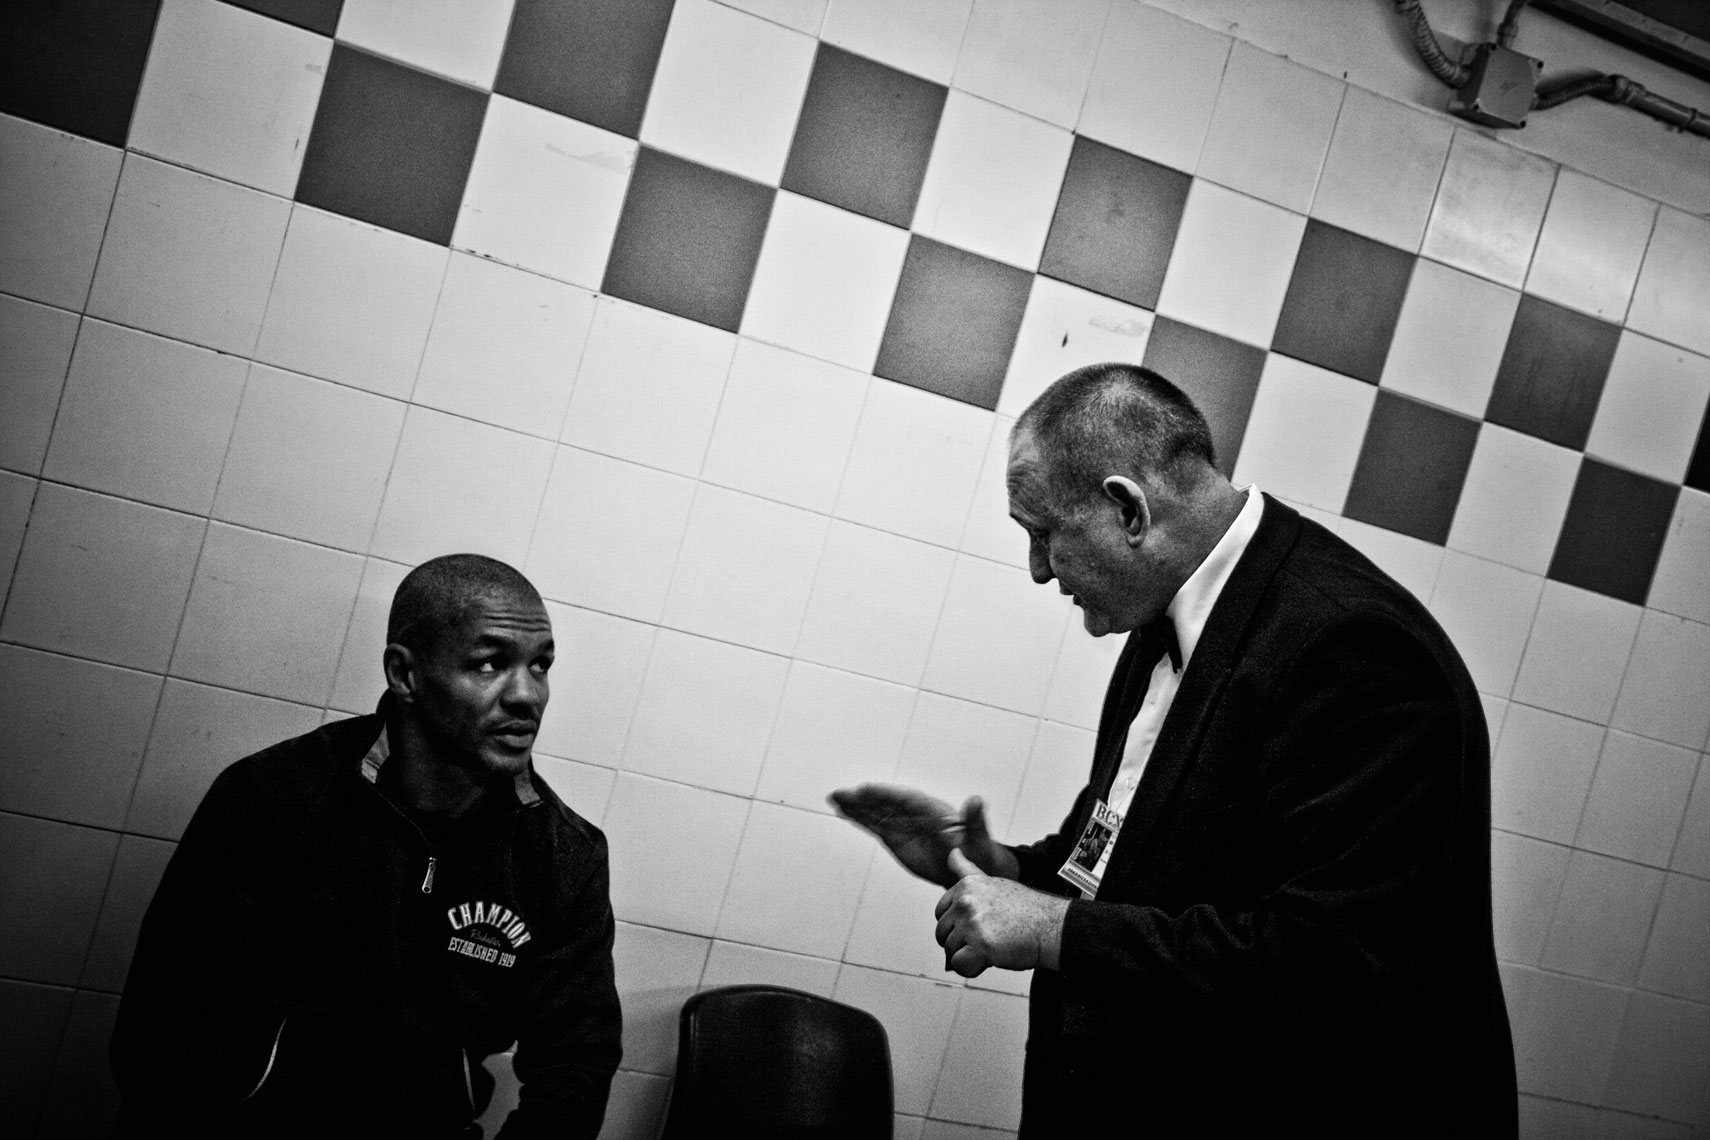 ITALY. Florence, 4th November 2011. Mandela Forum, the night of the match for the EBU (European Boxing Union) Welter Weight crown, Leonard Bundu inside the locker room listening to the referee who explains him the fairlplay rules to follow during the match.